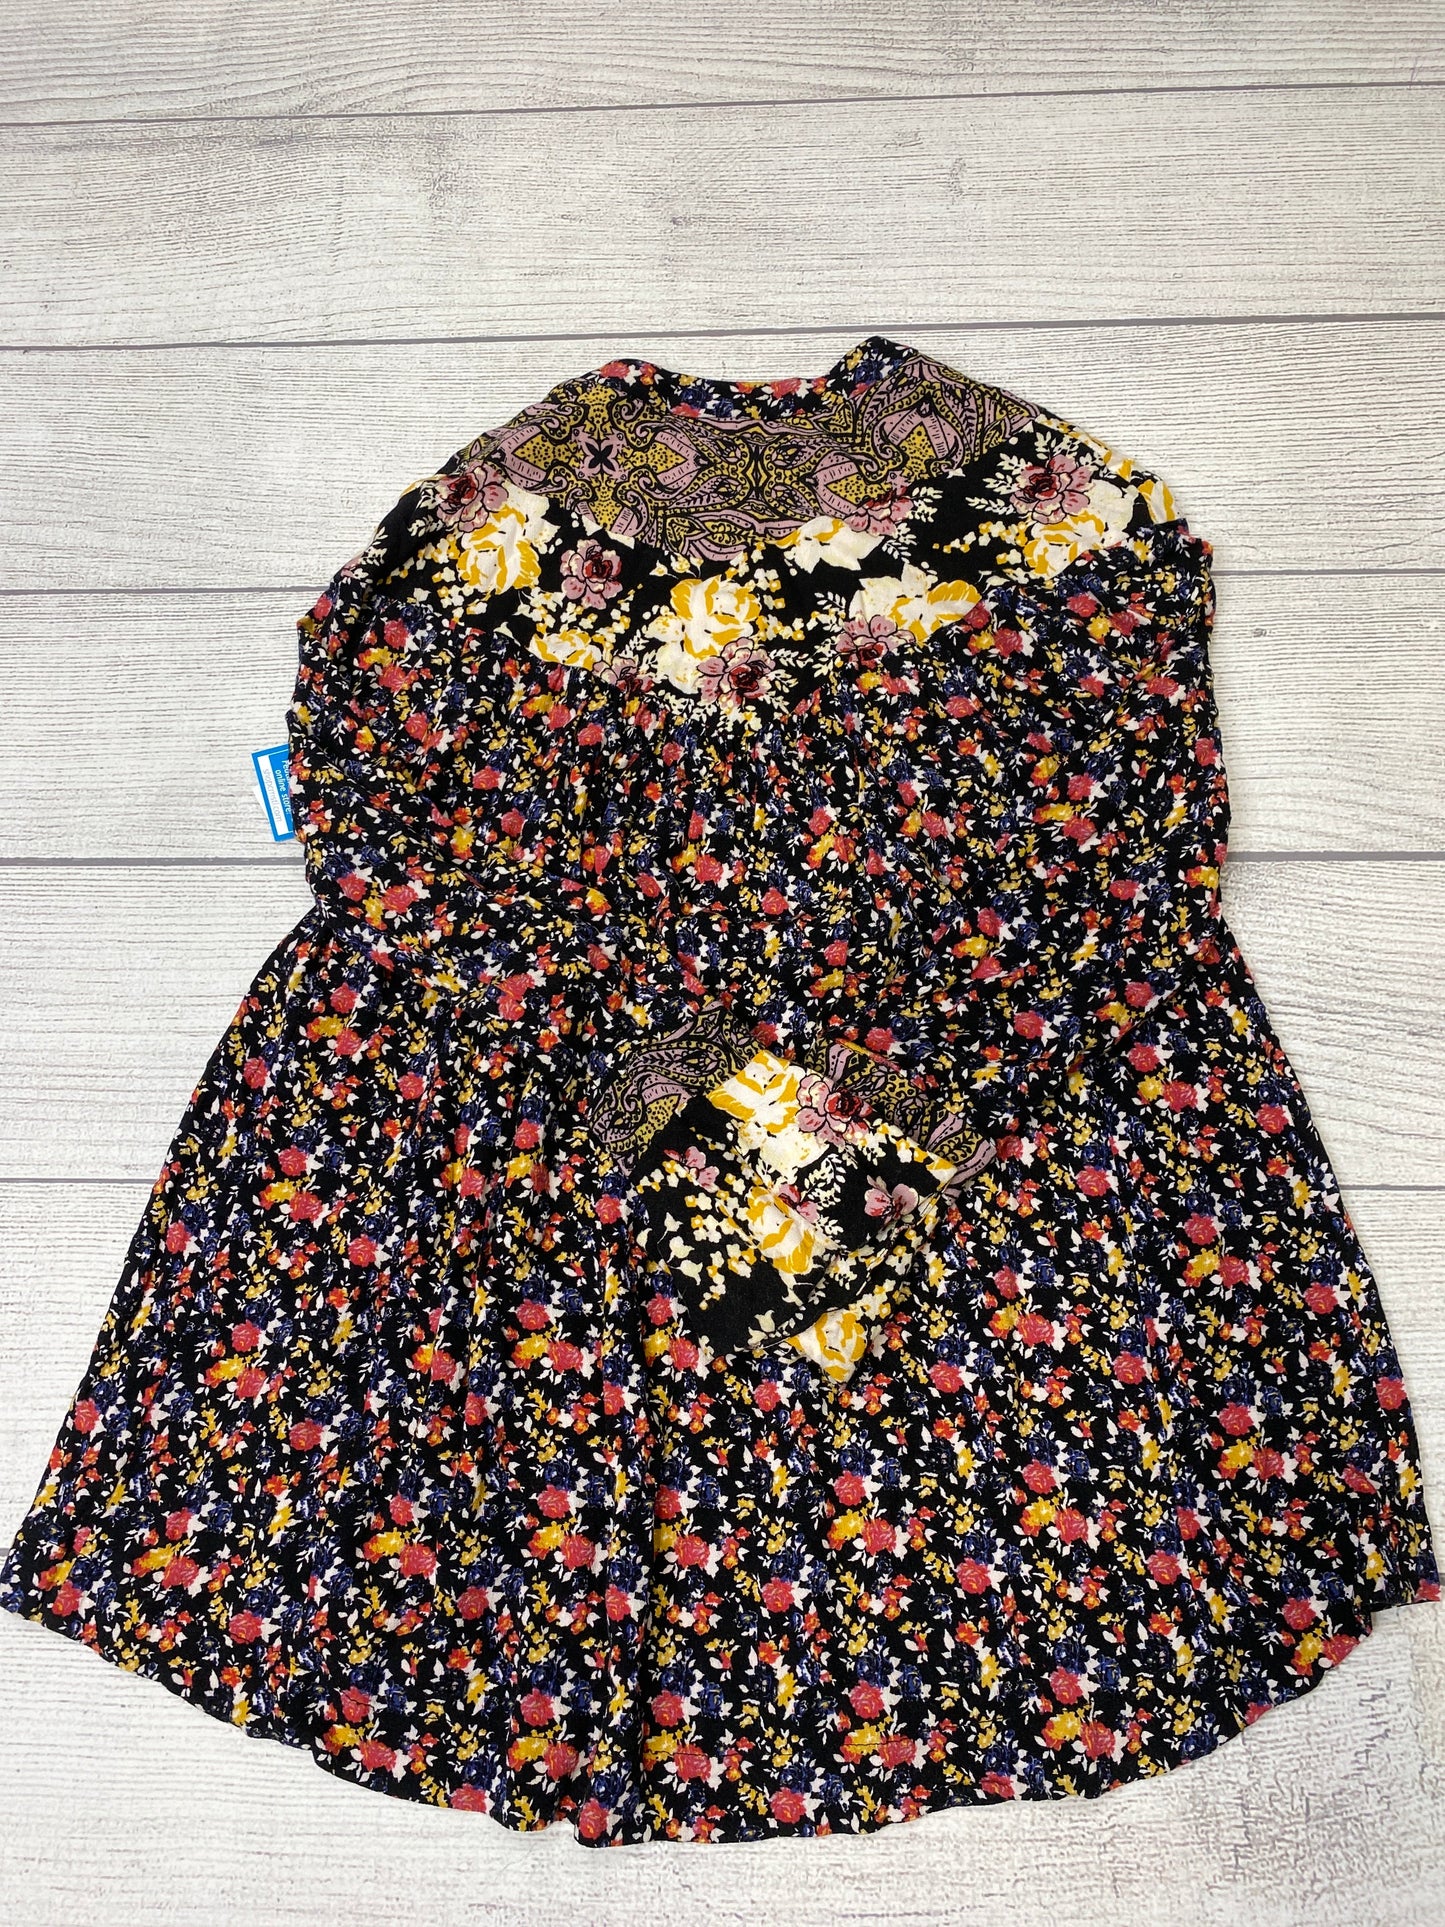 Black Floral Top Long Sleeve Free People, Size Xs